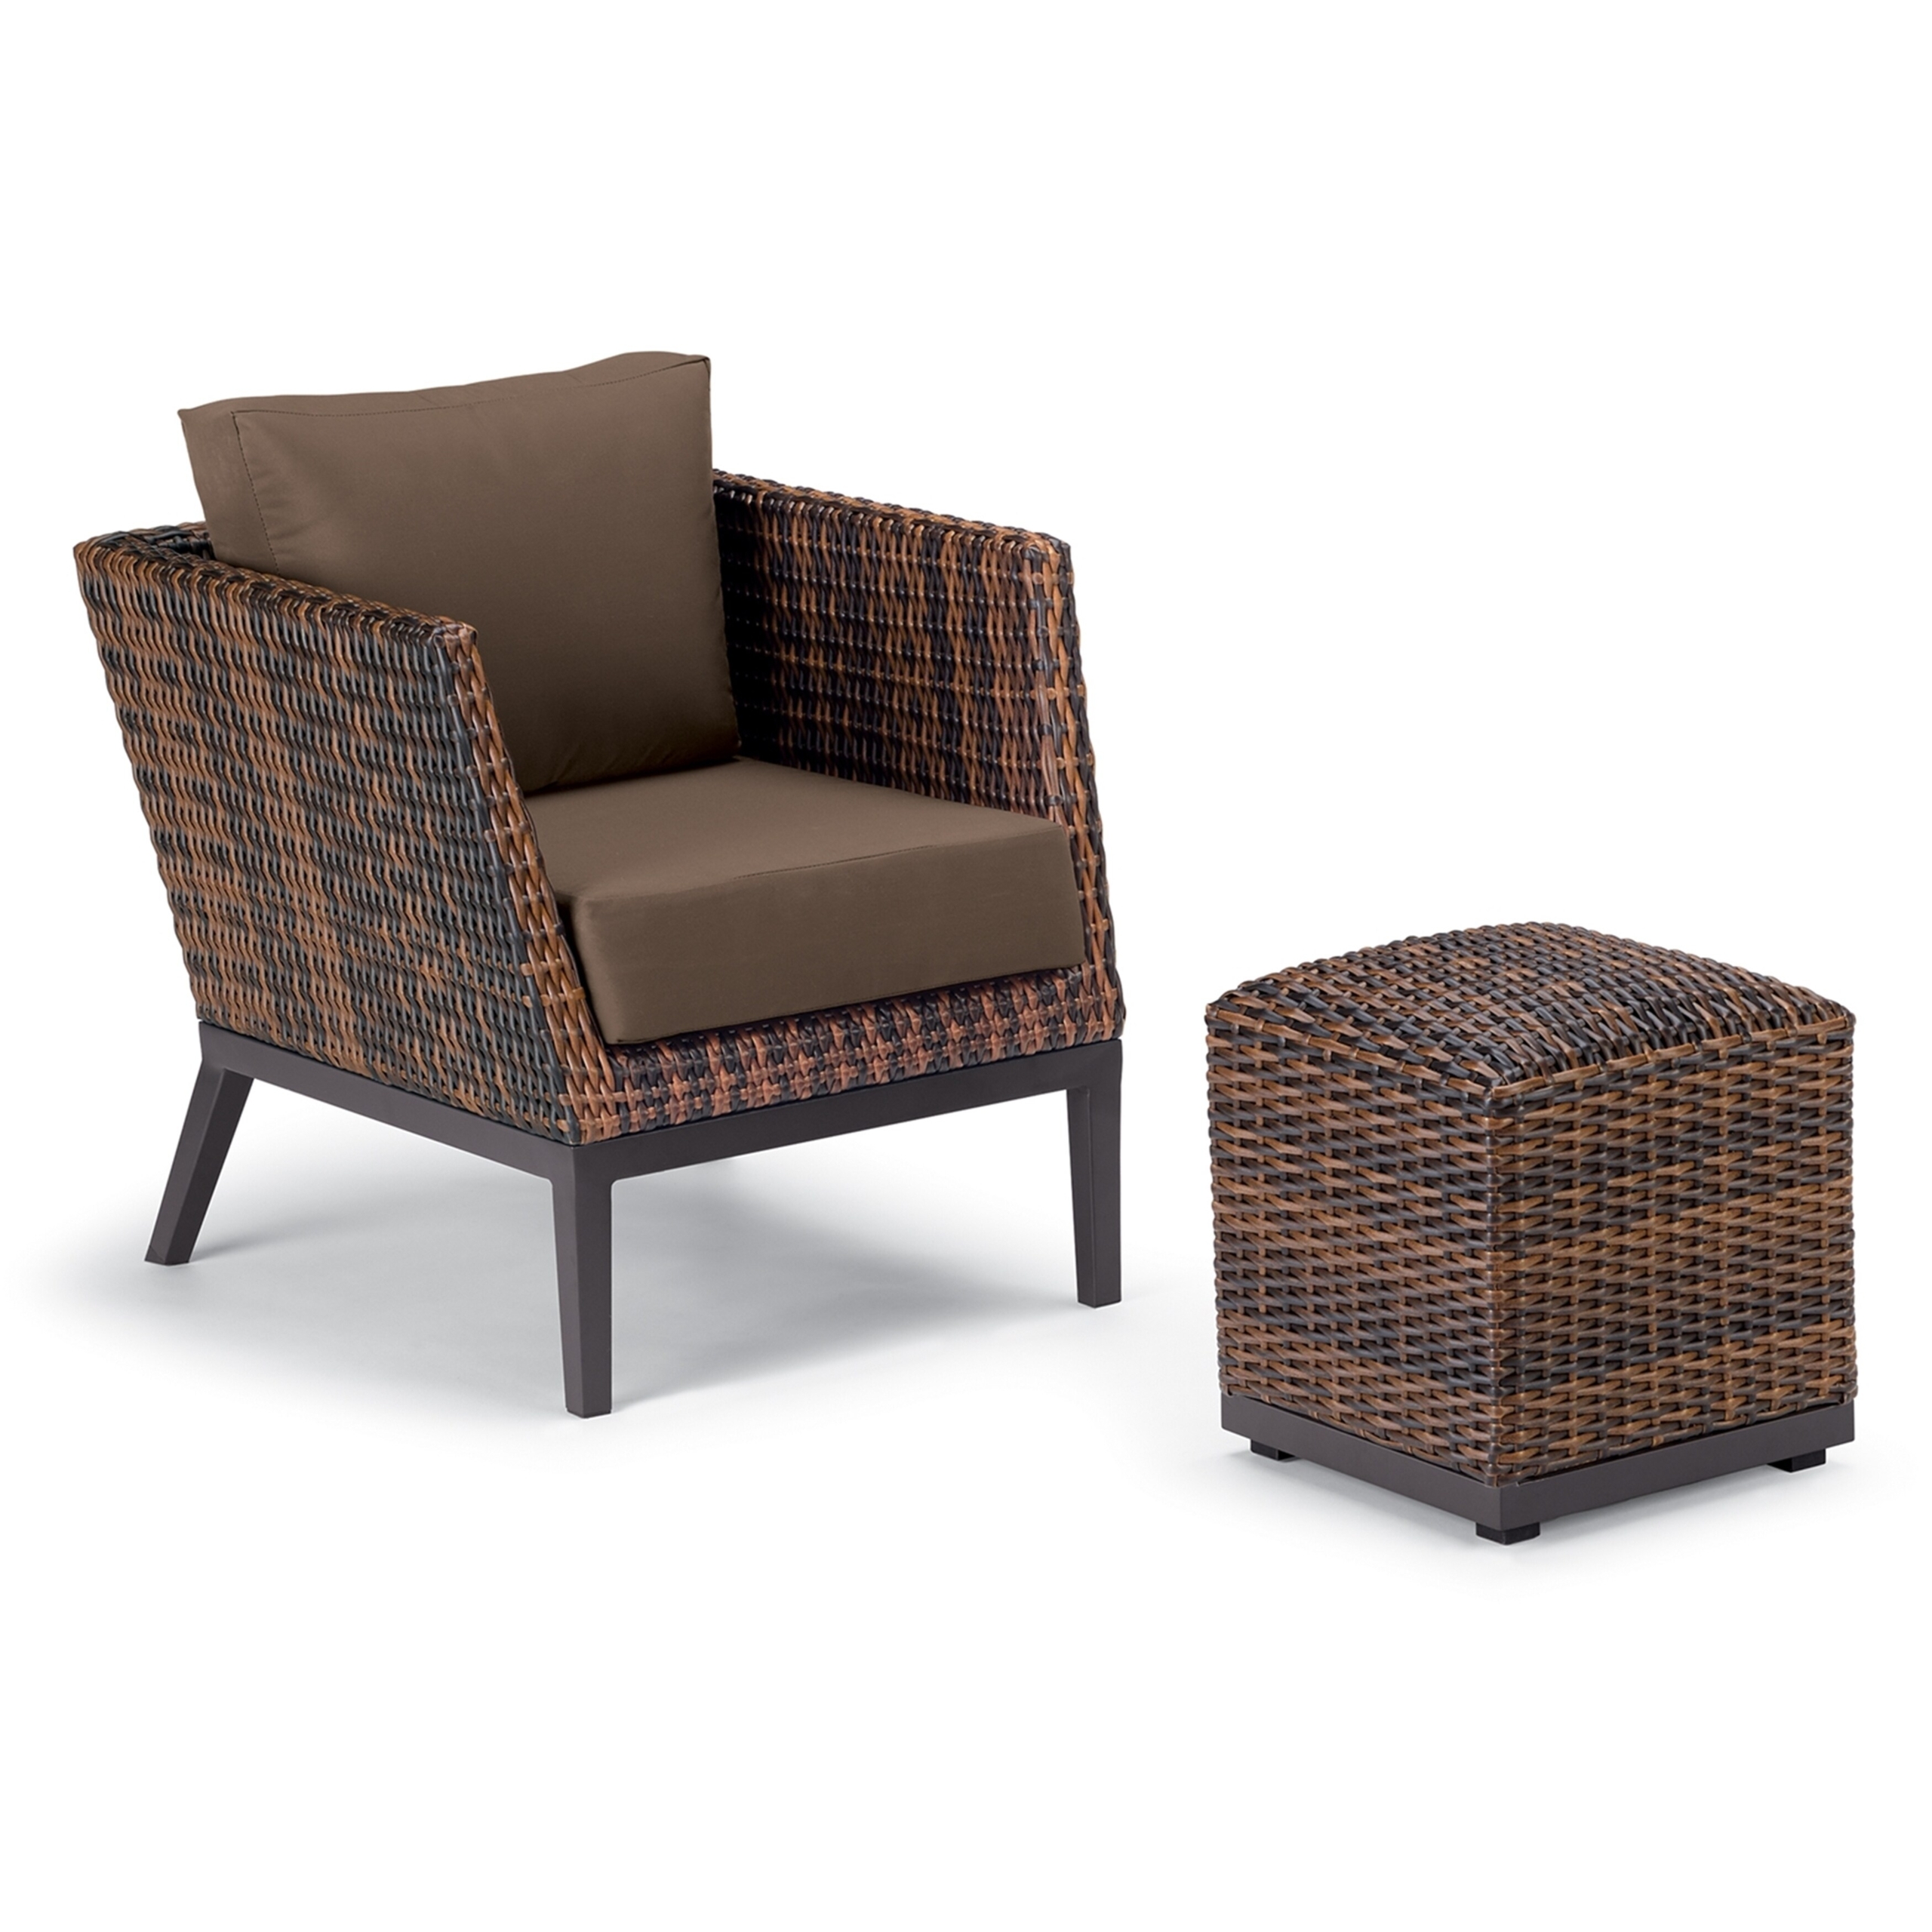 Outdoor Chairs With Ottoman Visualhunt, Oversized Patio Chairs With Ottoman Storage